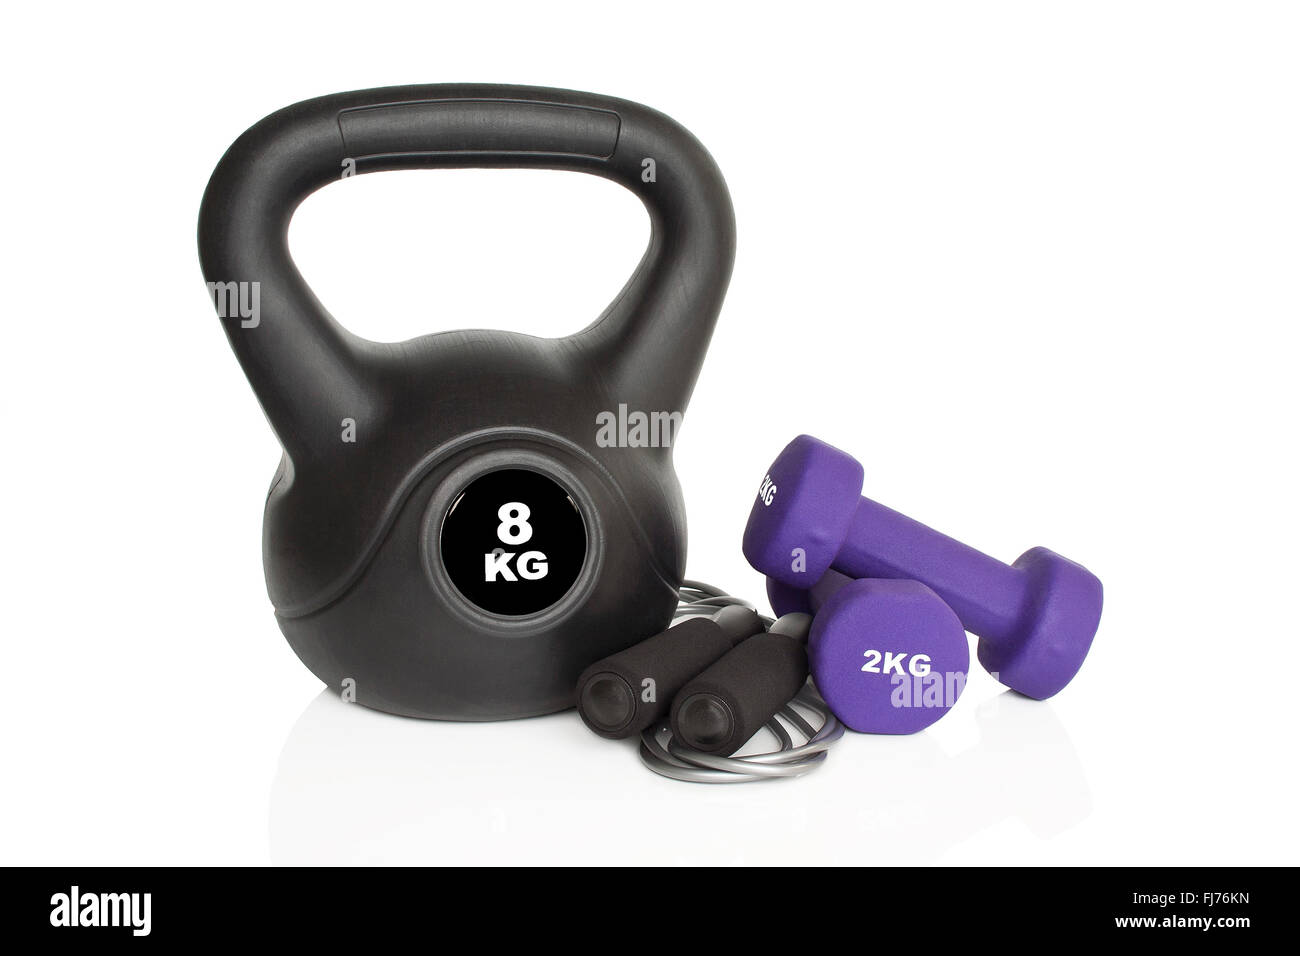 Dumbbells, kettlebell and skipping rope isolated on white background. Weights for a fitness training. Stock Photo